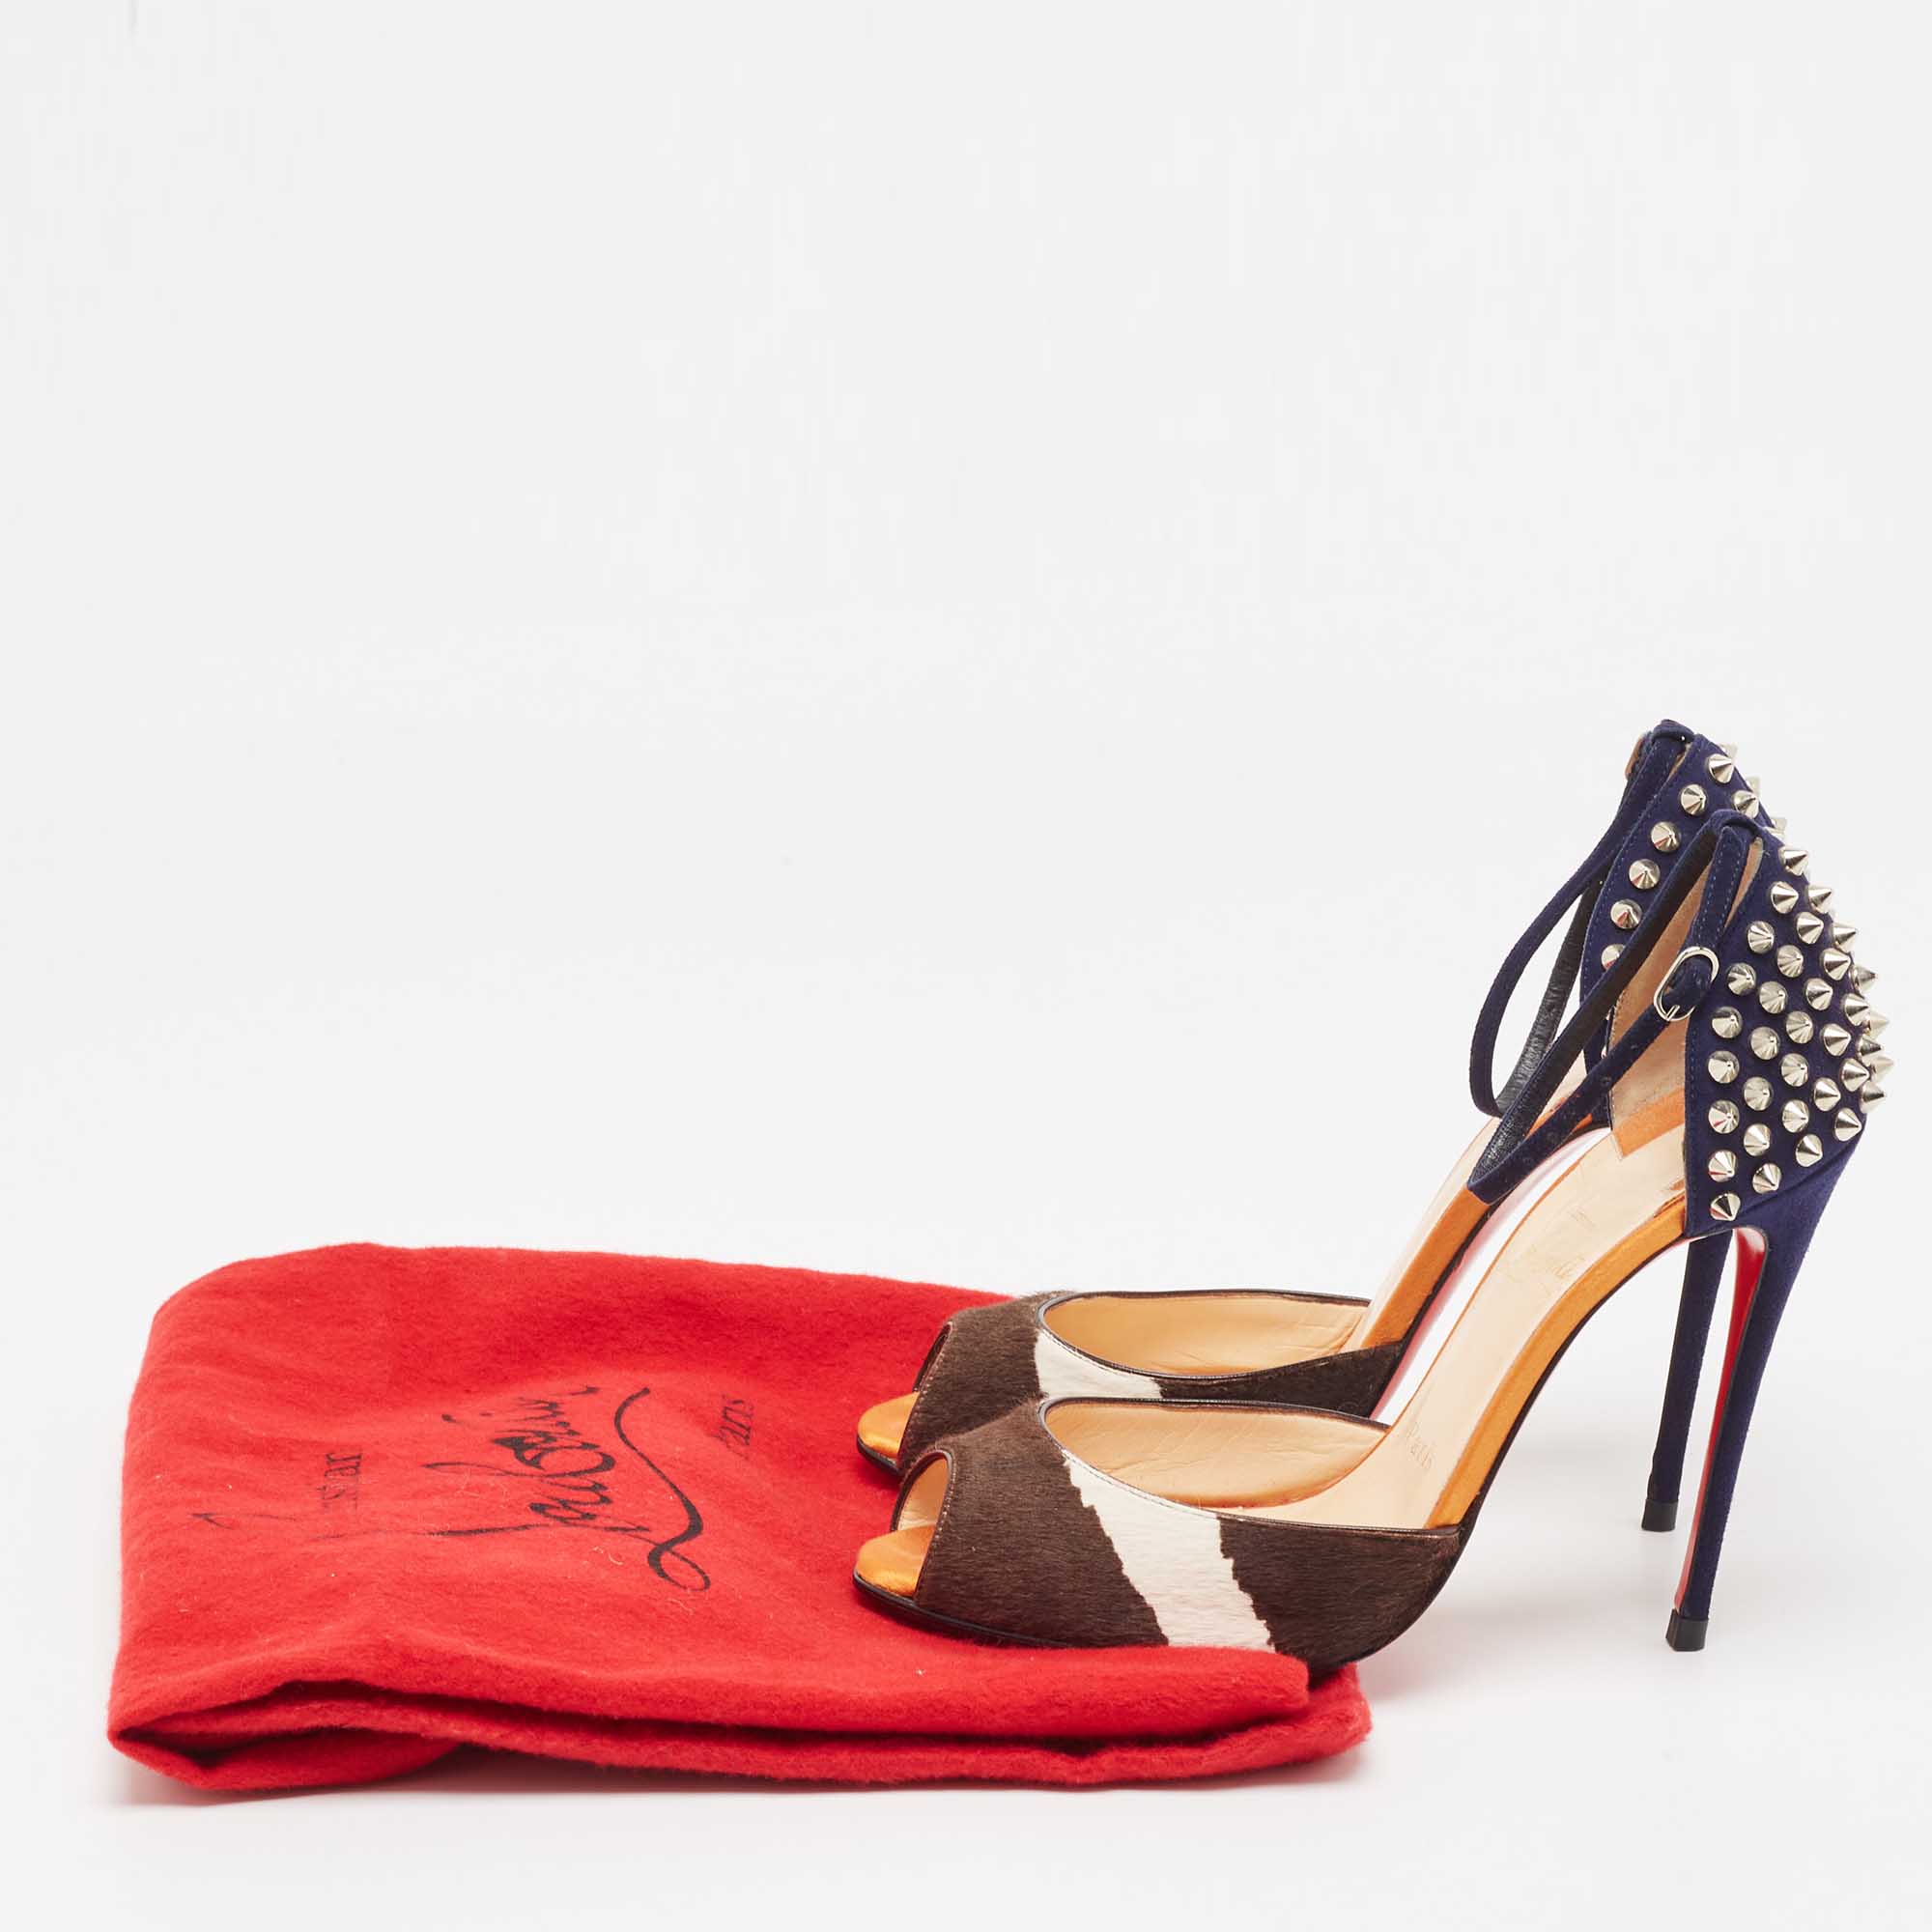 Christian Louboutin Tricolor Calf Hair And Suede Pina Spike Sandals Size 37